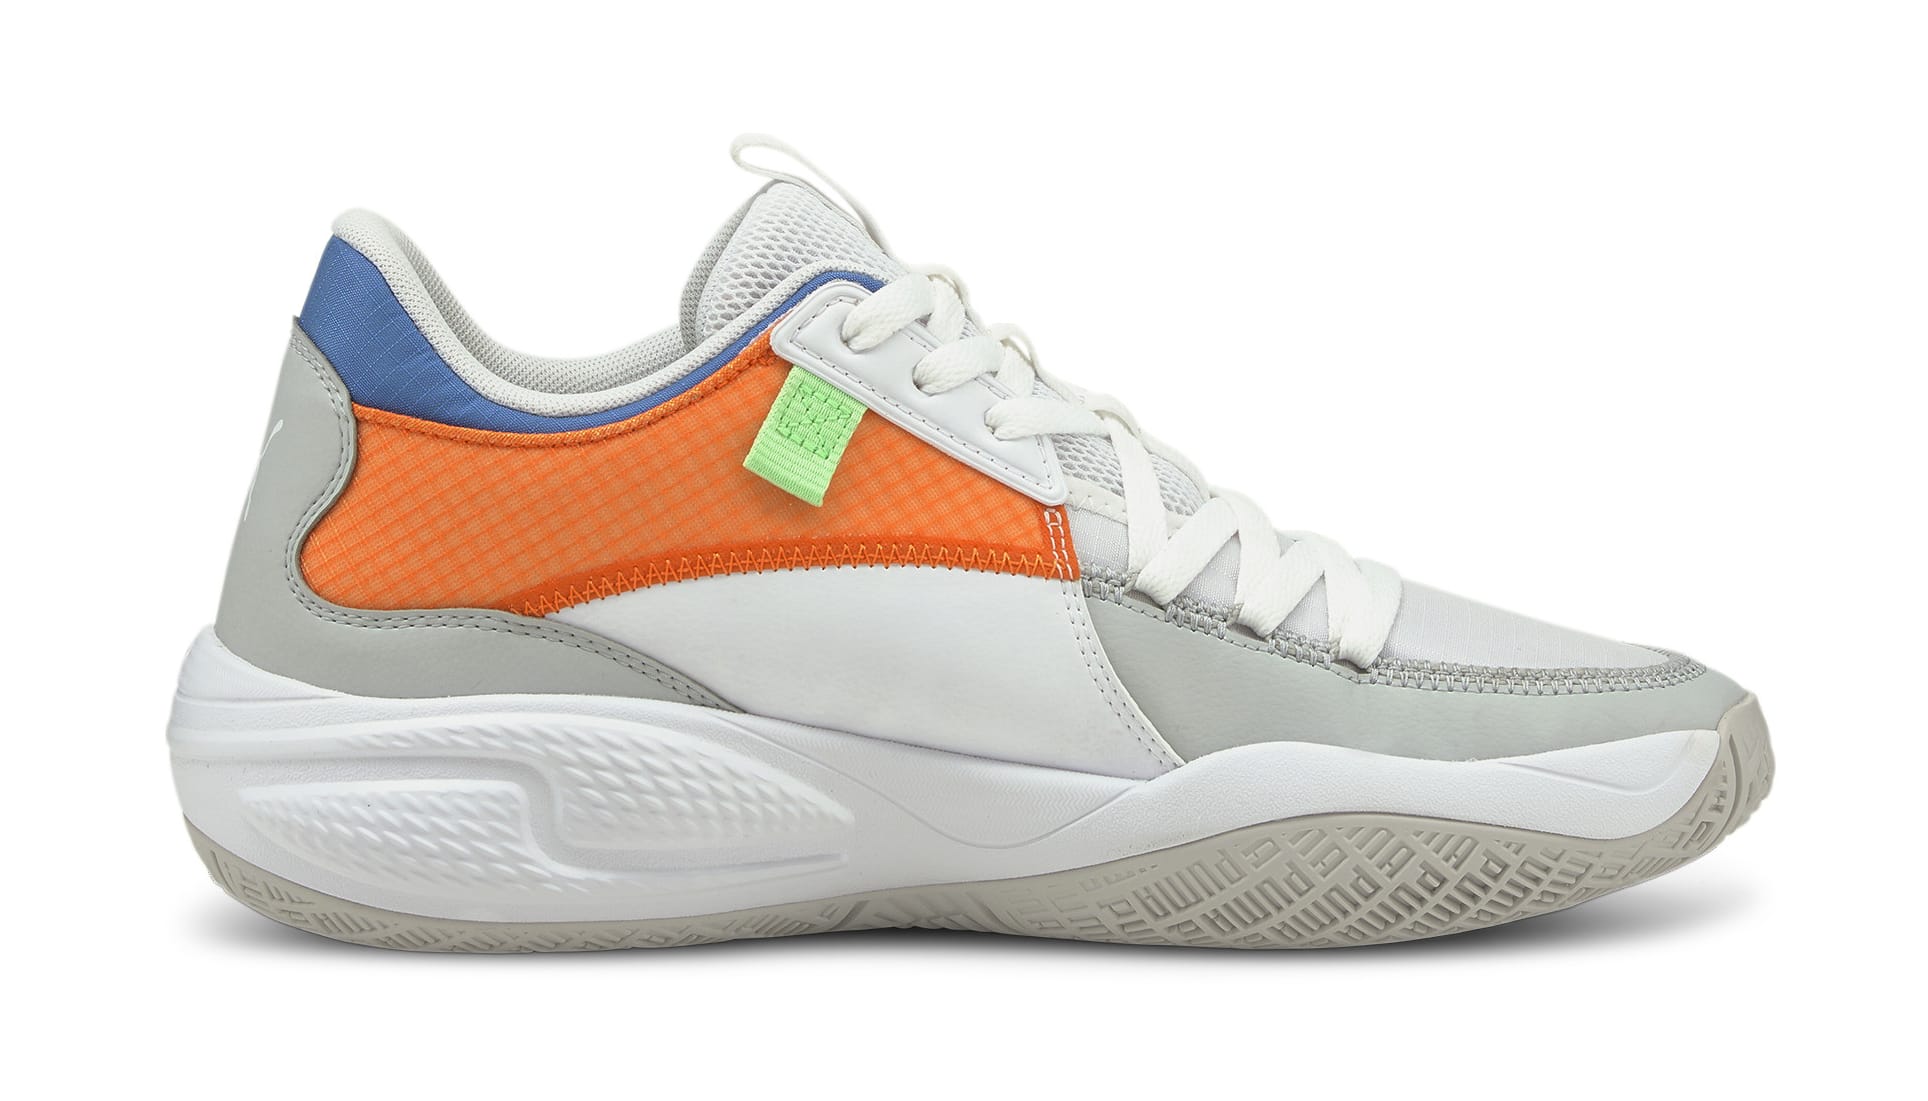 Puma Basketball Court Rider Release Date April 2021 | Sole Collector